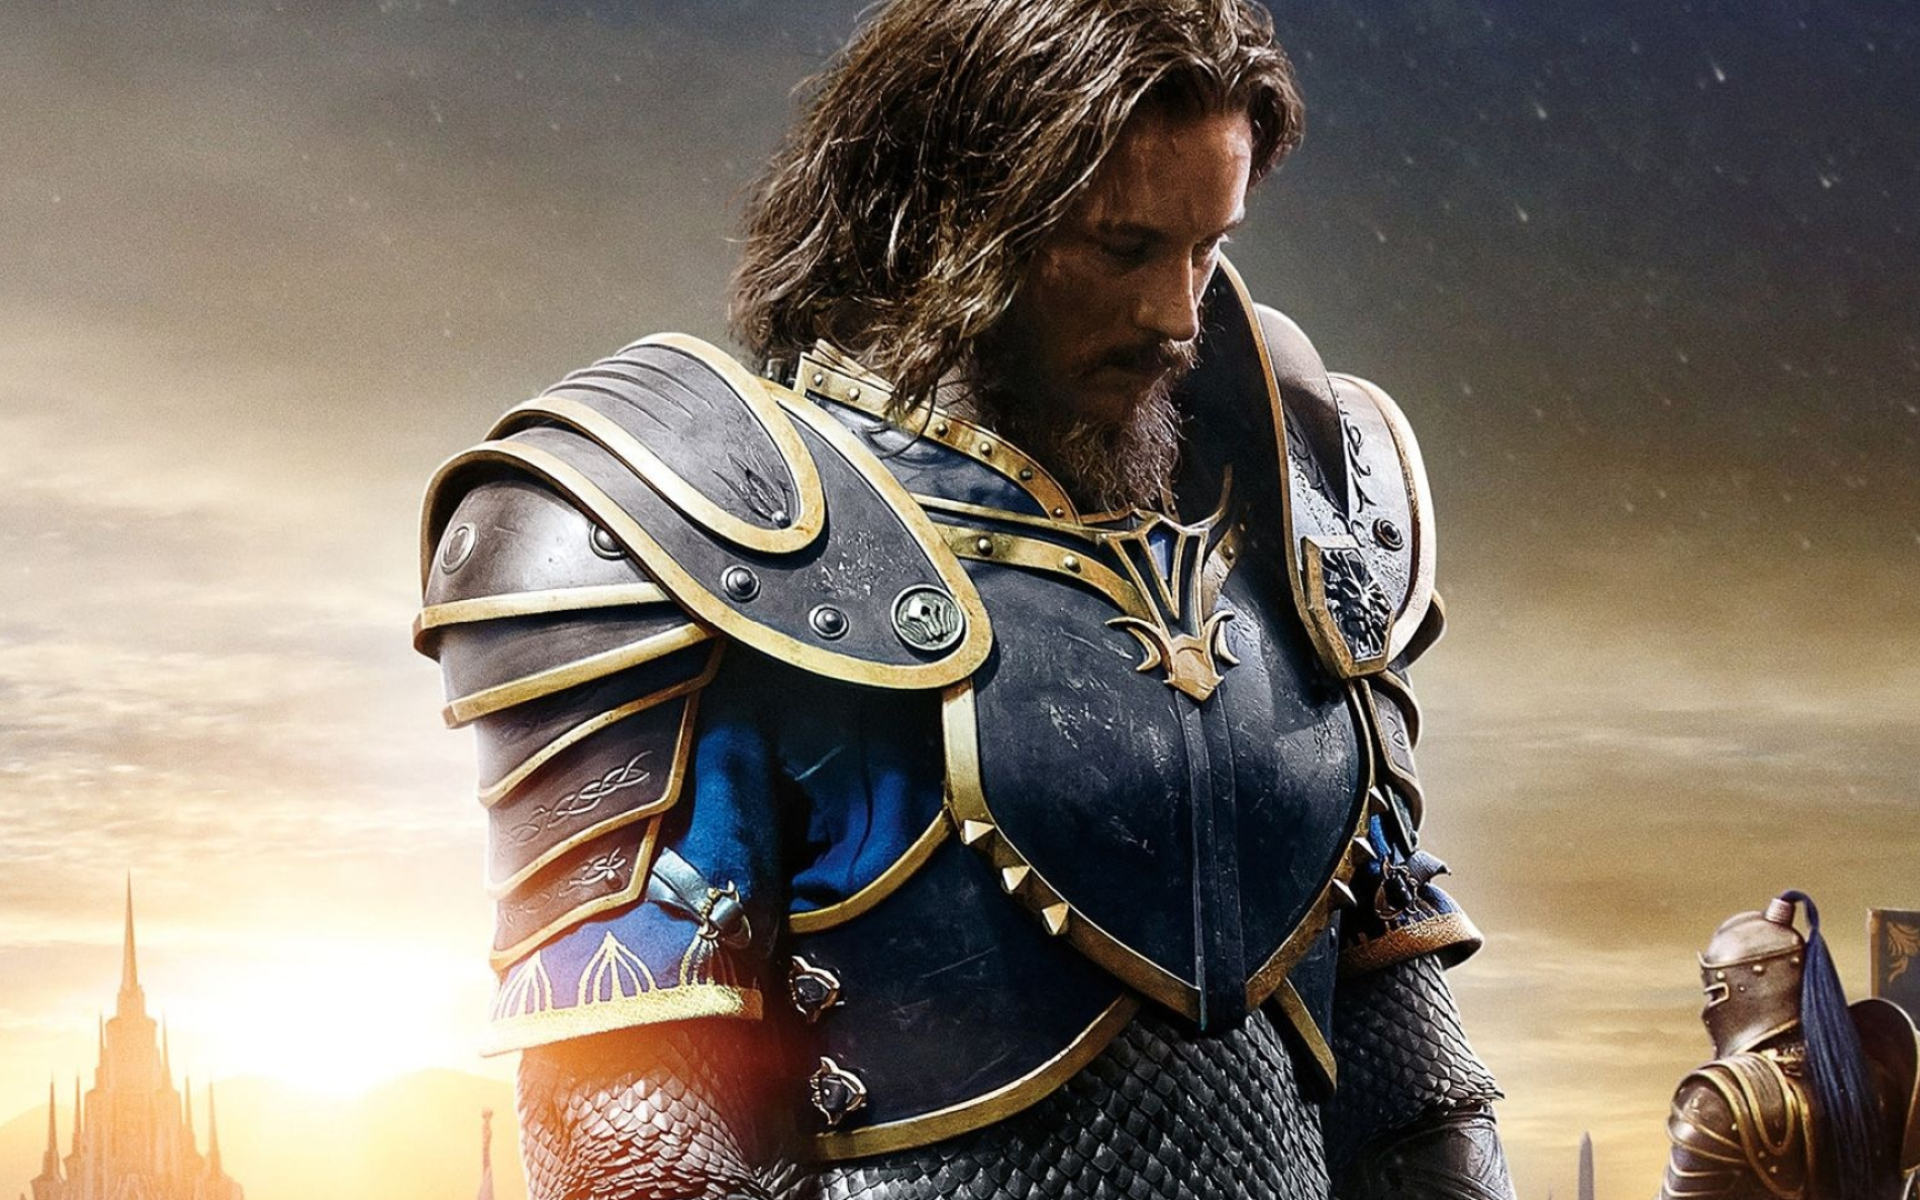 Warcraft (Movie): Anduin Lothar, the heroic knight who leads the human army against the orcs. 1920x1200 HD Background.